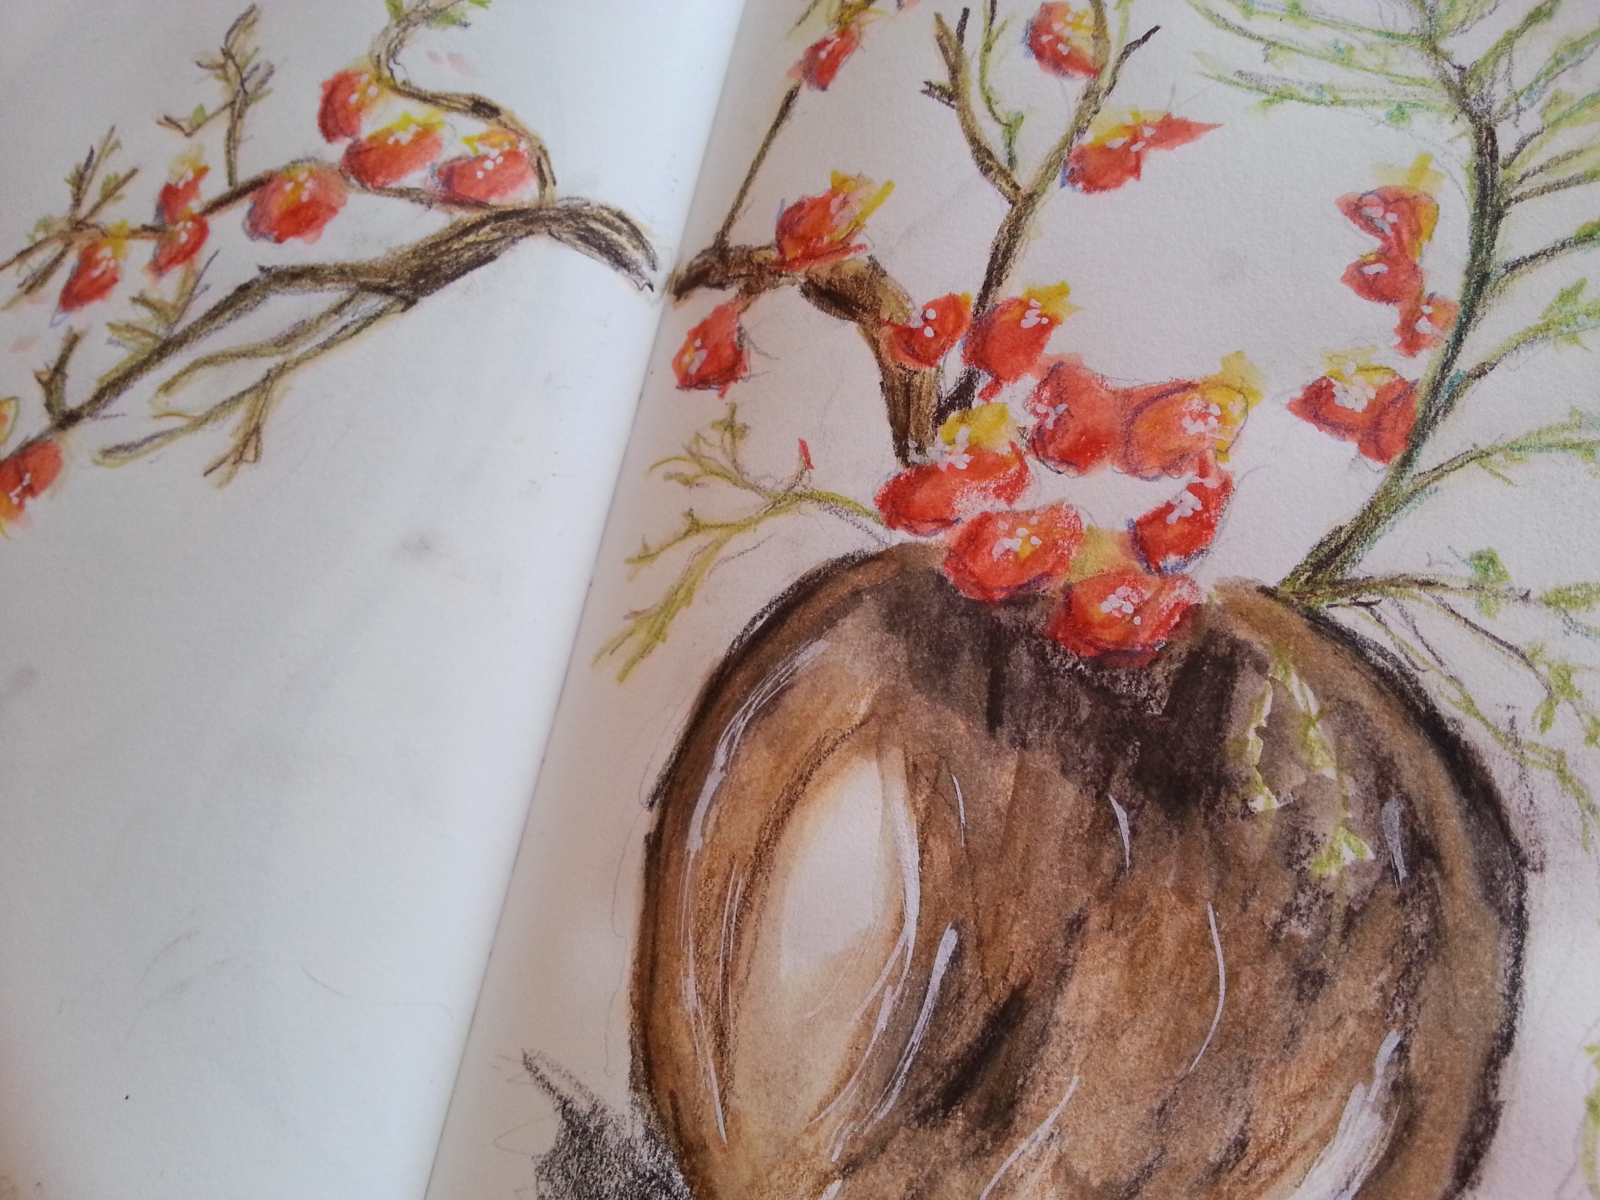 Japanese Quince and Baby's Breath Spinea by Cristina Parus @ creativemag.ro